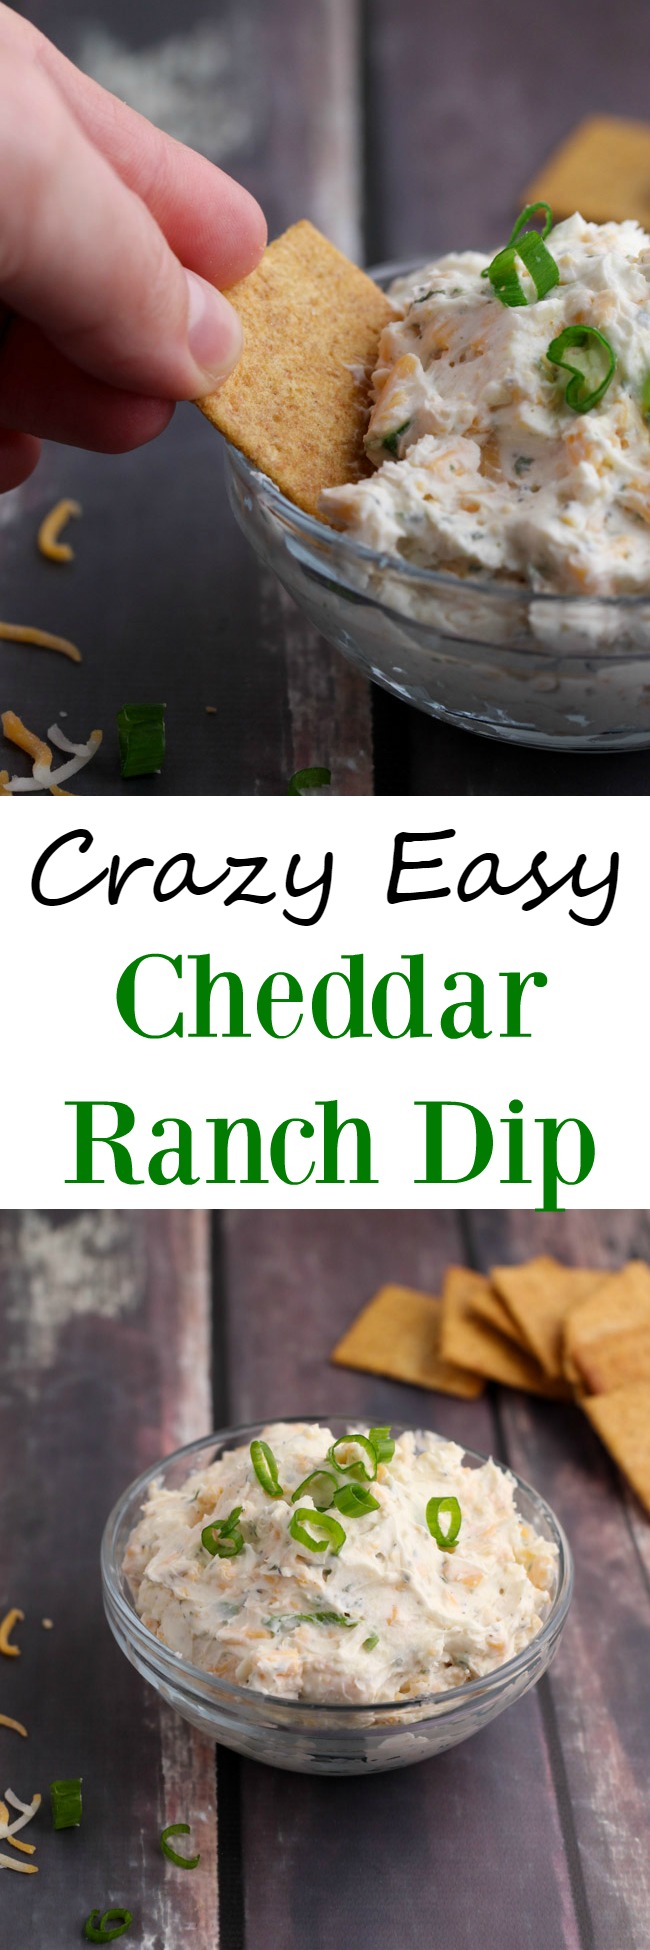 Crazy easy recipe for cheddar ranch dip. No cooking required and sure to be a crowd favorite. www.cookingismessy.com